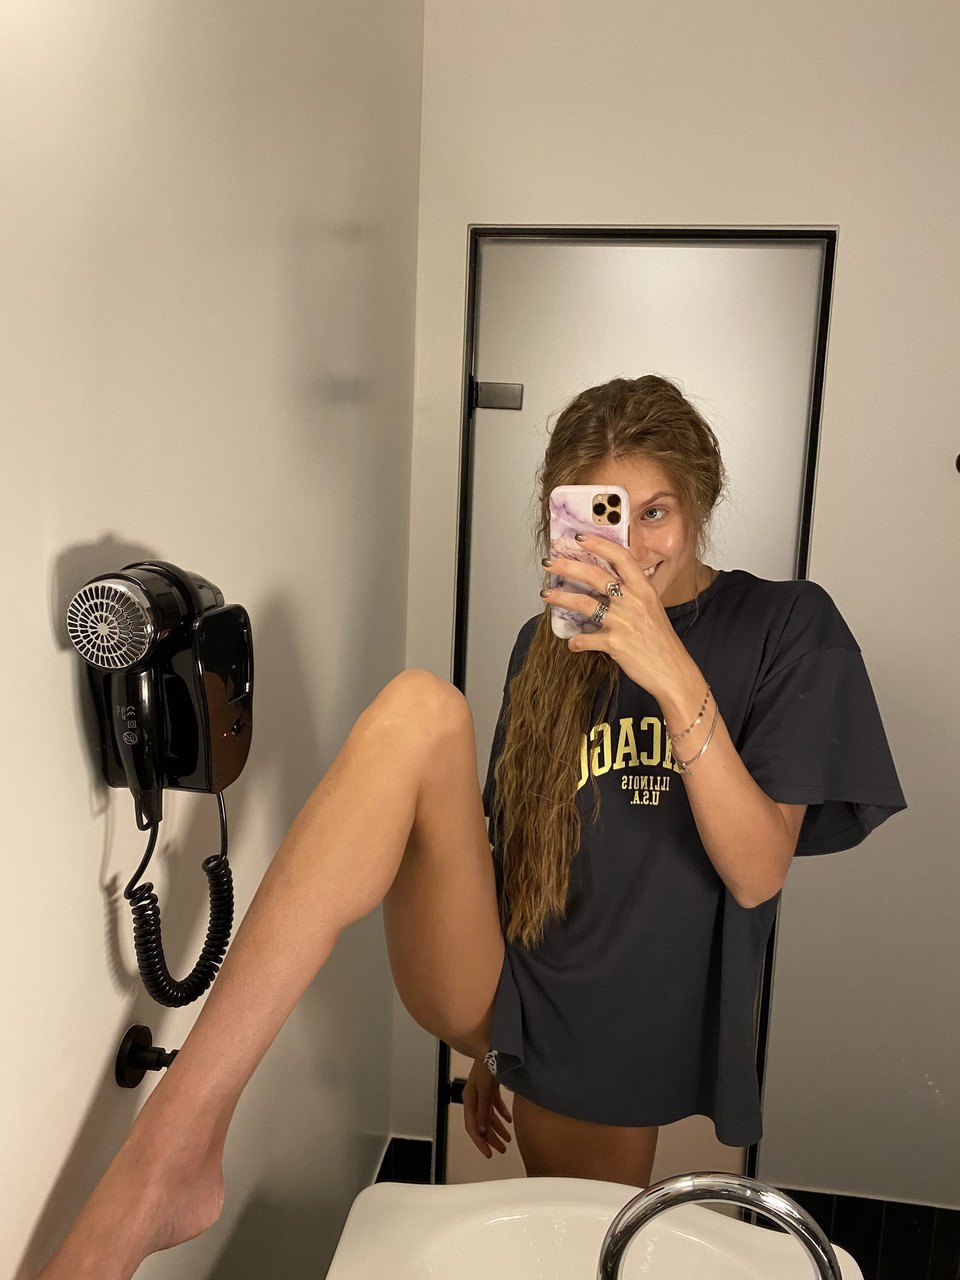 Skinny babe takes nude selfies showing her tiny tits and her tight ass 포르노 사진 #423874984 | OnlyFans JasminJass Pics, Homemade, 모바일 포르노